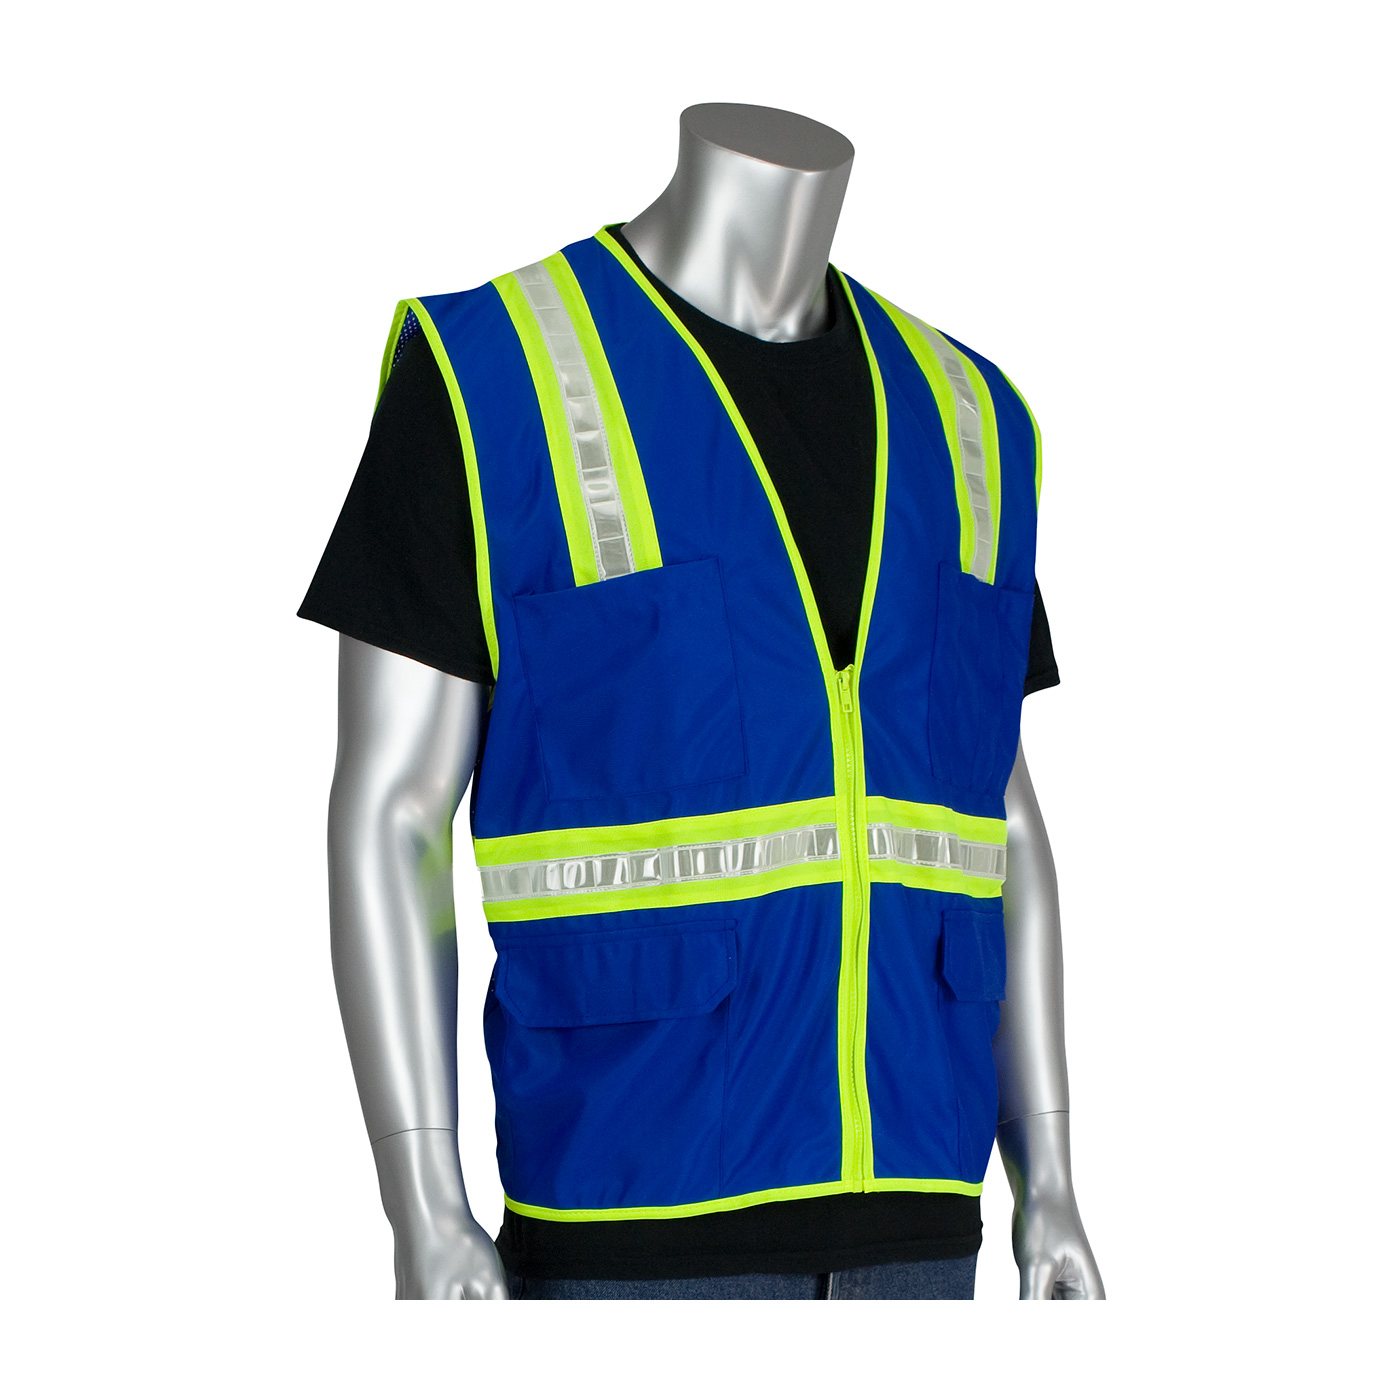 PIP Non-Ansi Surveyor's Style Safety Vest from Columbia Safety